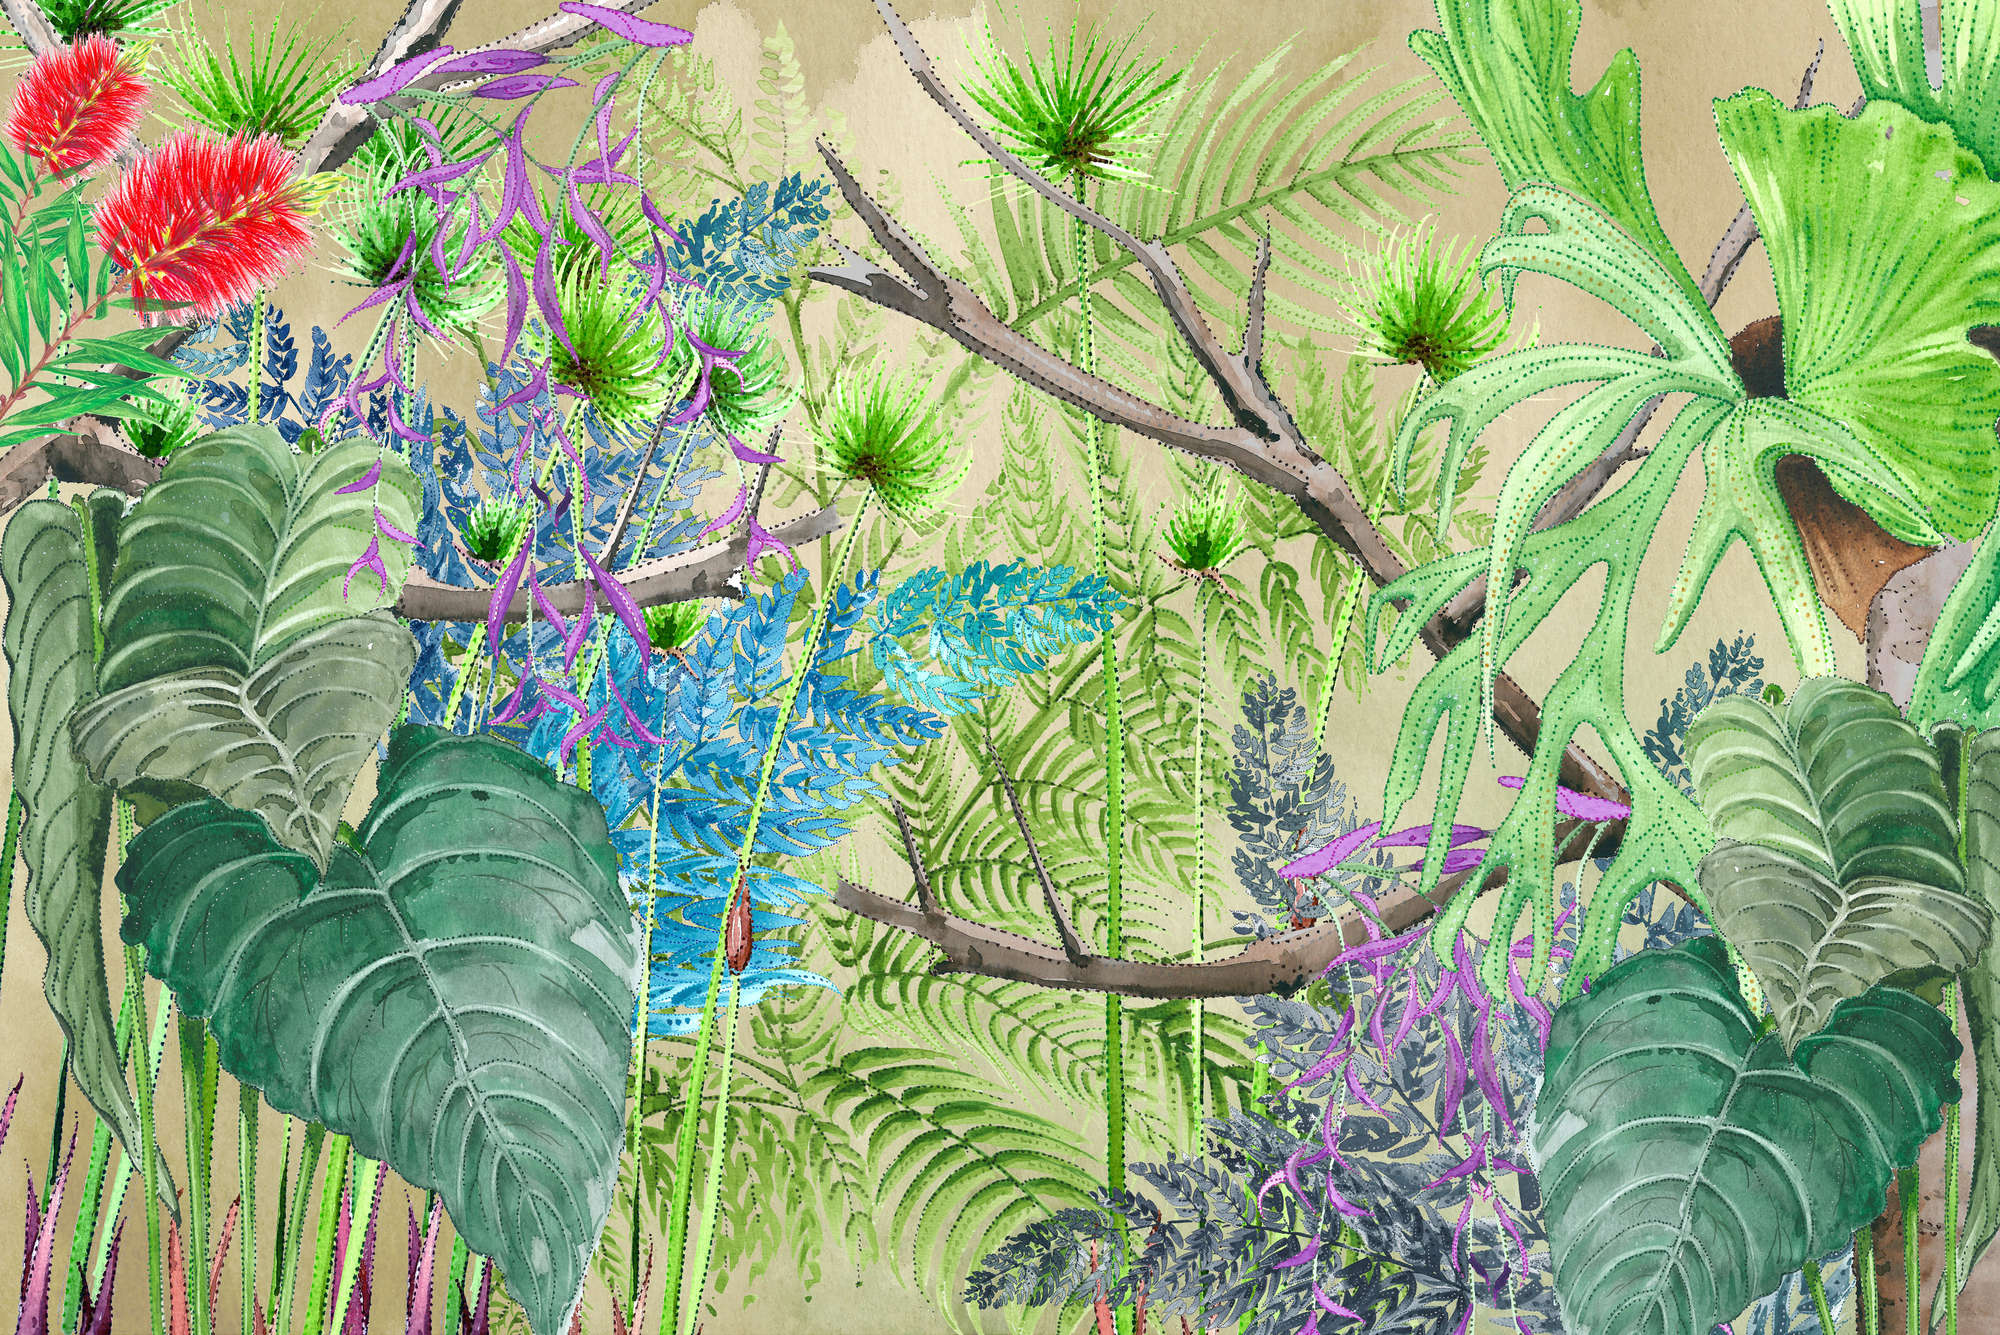             Jungle mural with flowers in blue and green on textured nonwoven
        